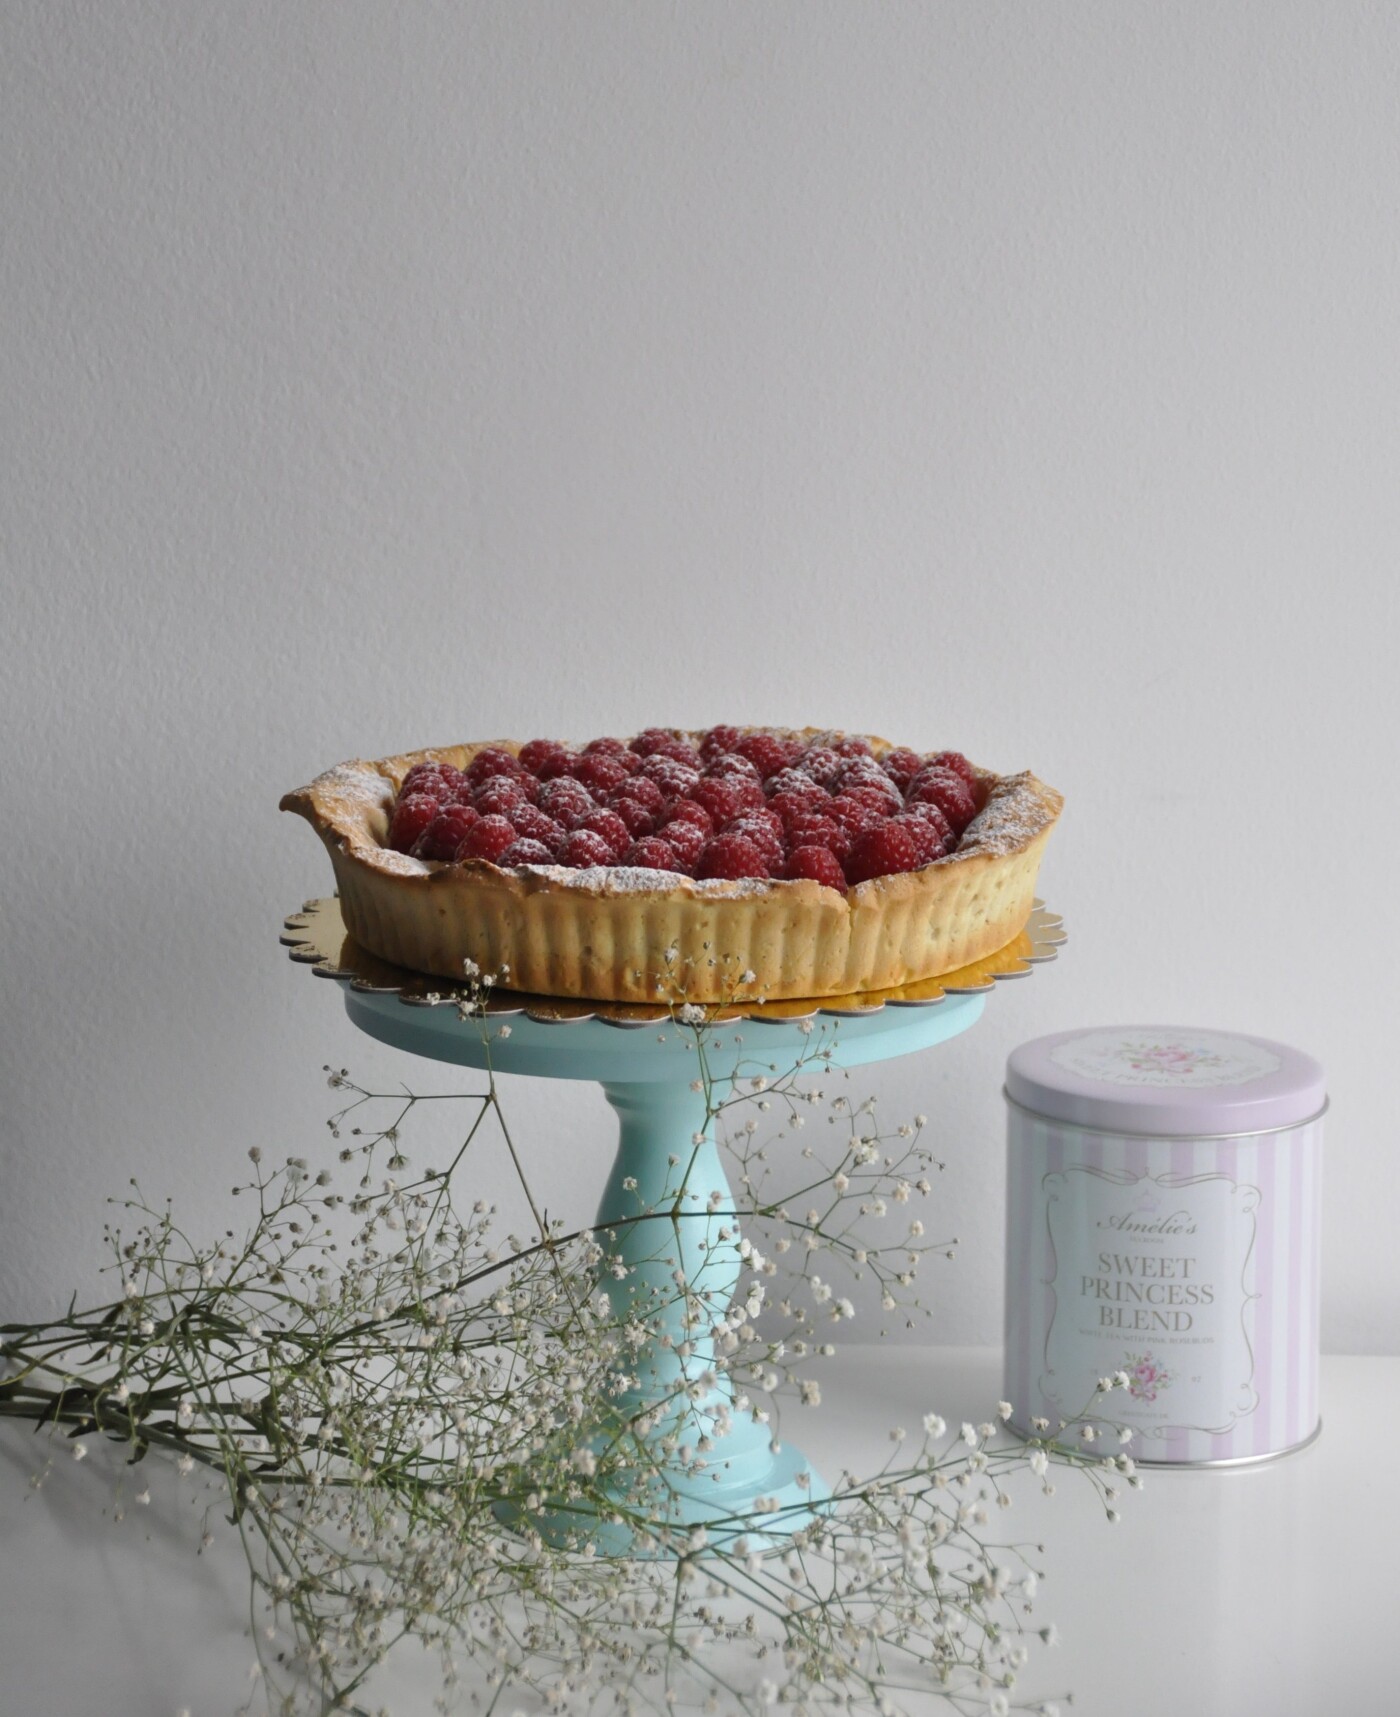 This raspberry and lemon curd tart is a favorite and I have baked it for a colleague at the office. A sweet friend had posted the cake stand to me the night before, as an adorable birthday gift. I though it would make a good combination with the baby breaths and the pouring rain outside...